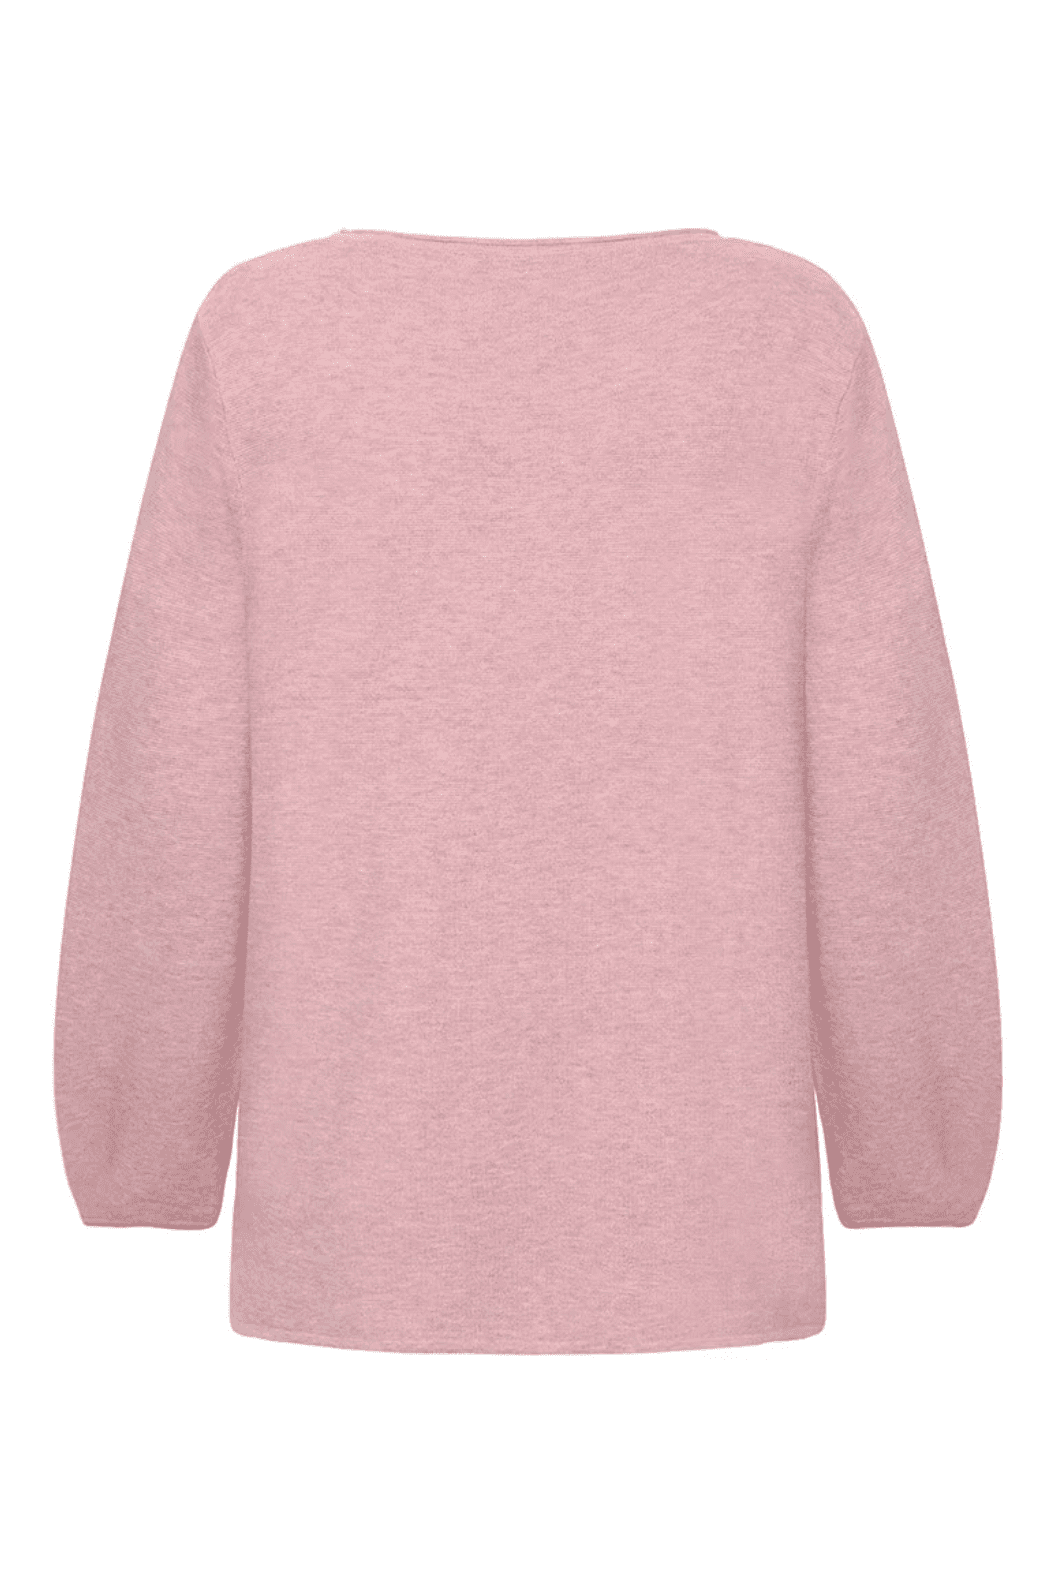 MANSTED Mirabelle Sweater